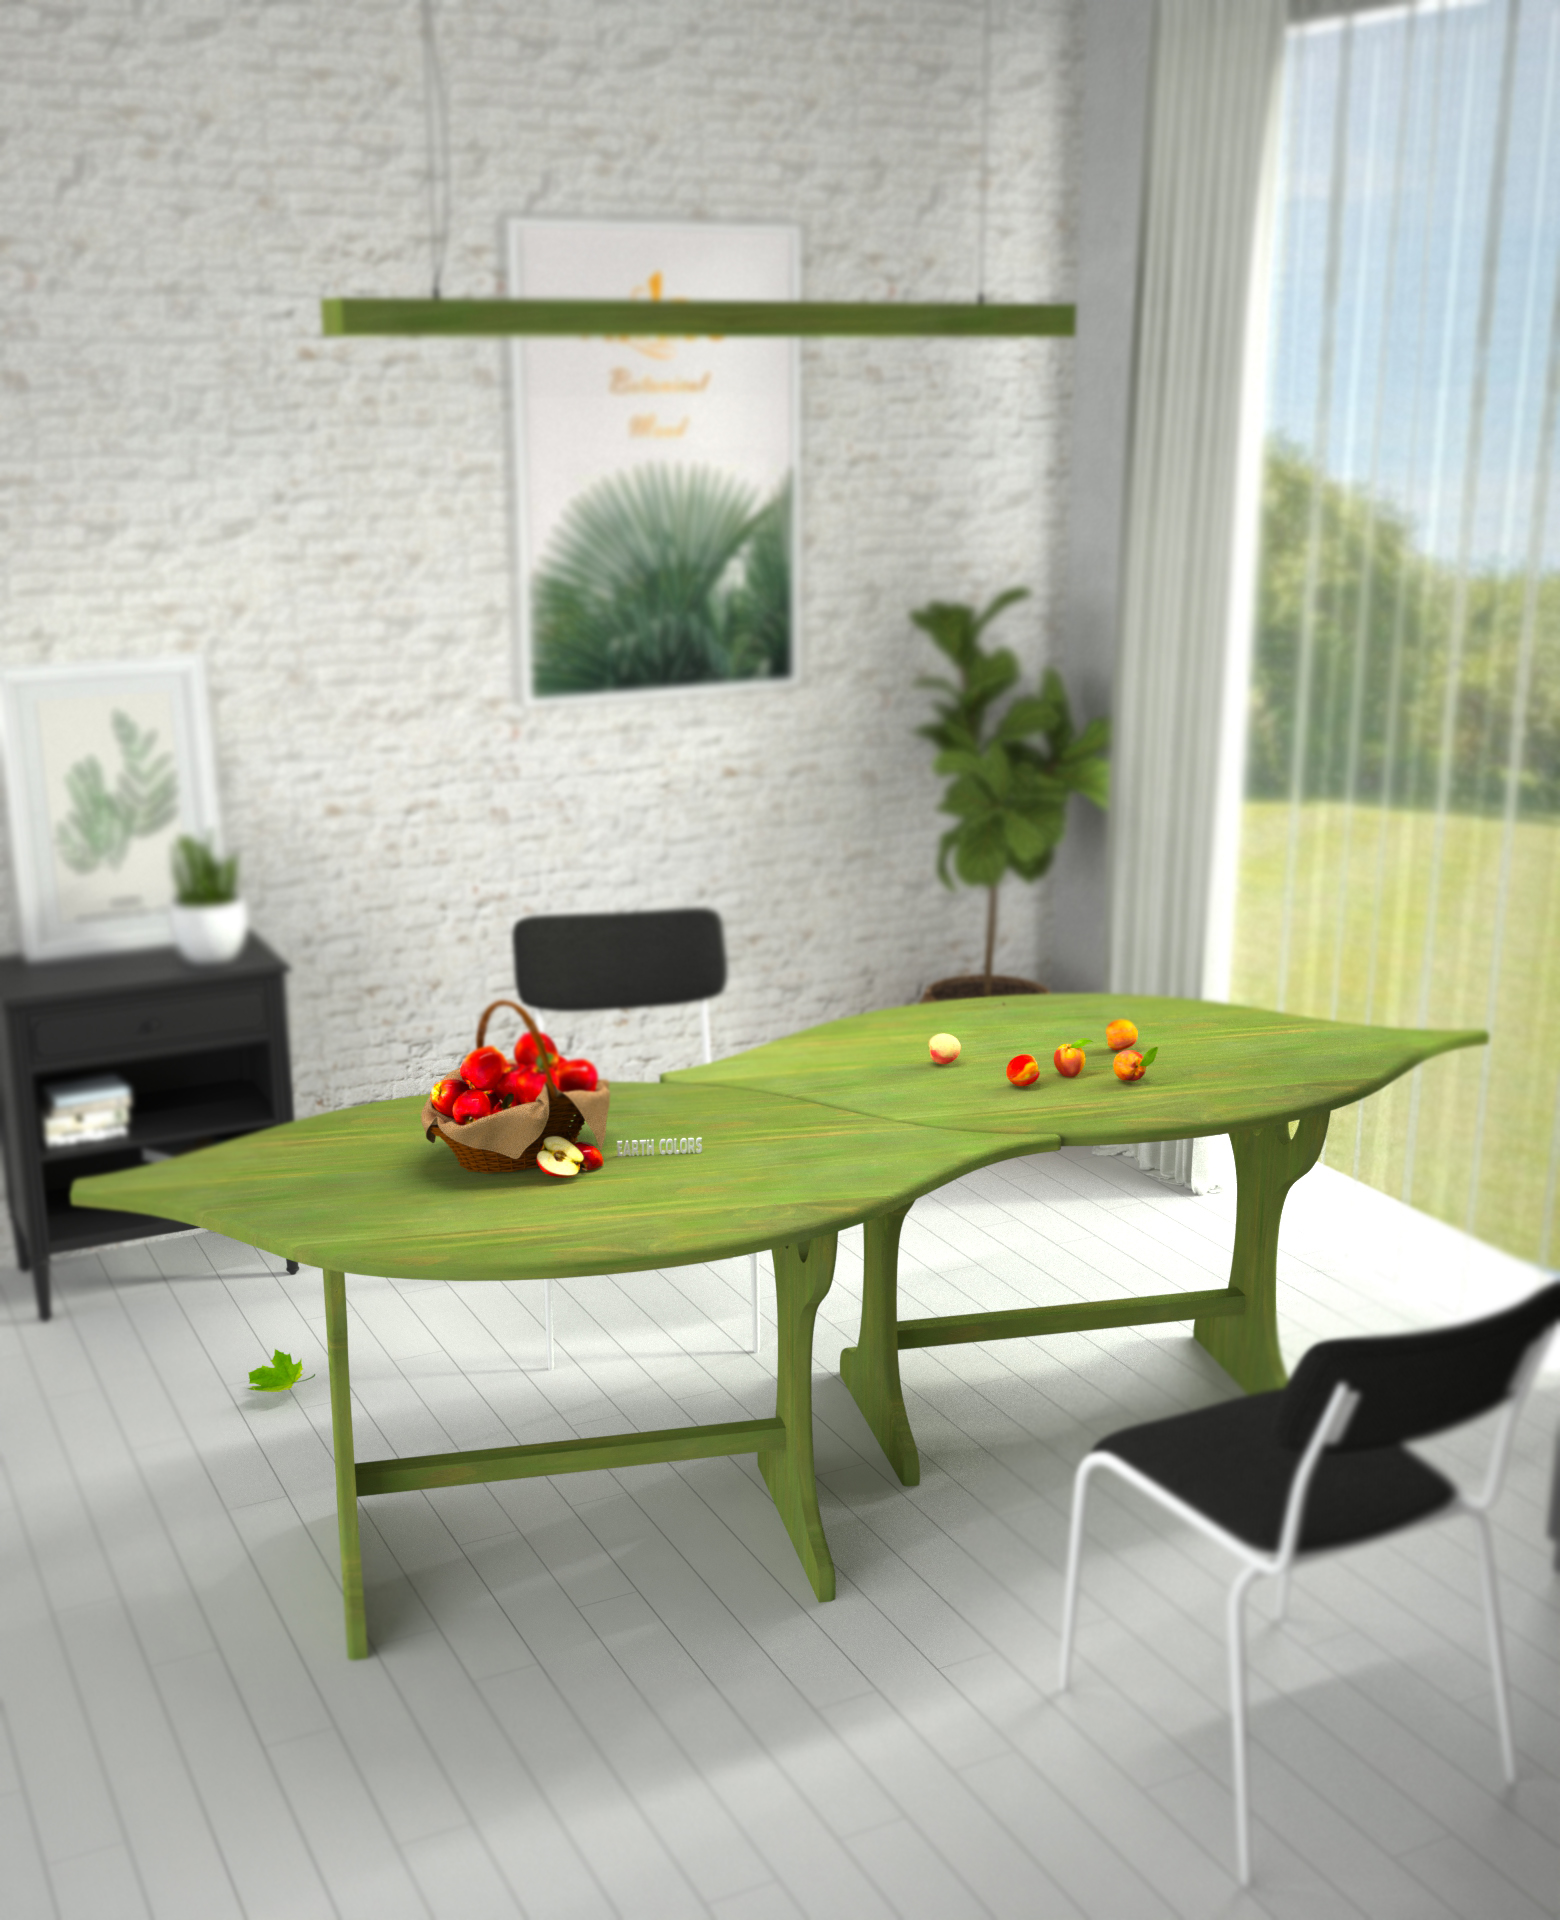 Simple wooden dining table design